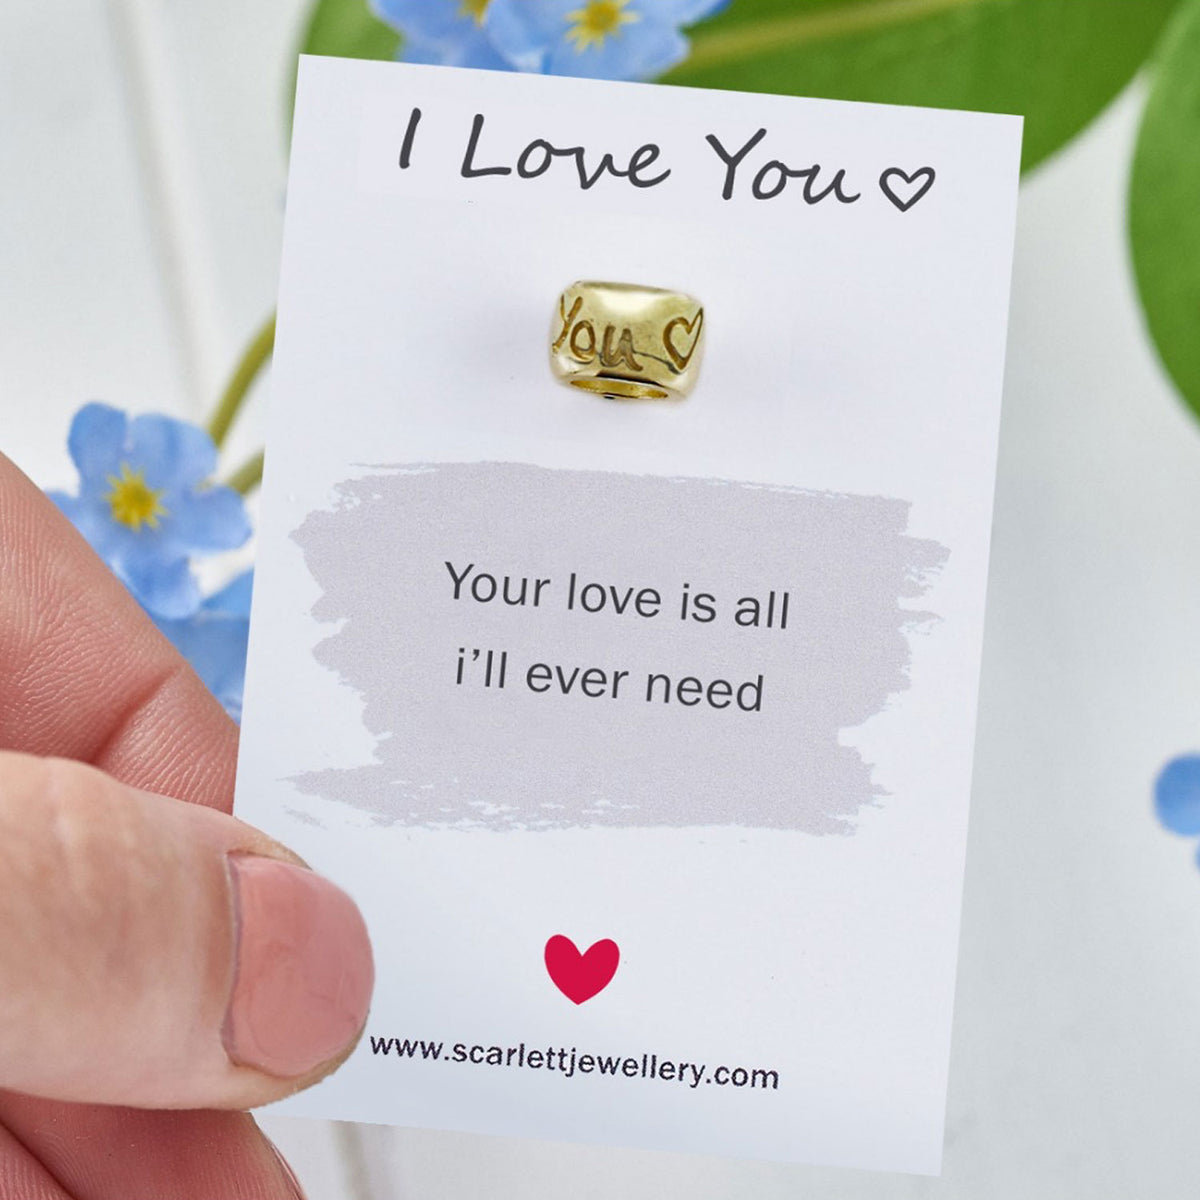 I love you engraved solid gold bead charm Scarlett Jewellery